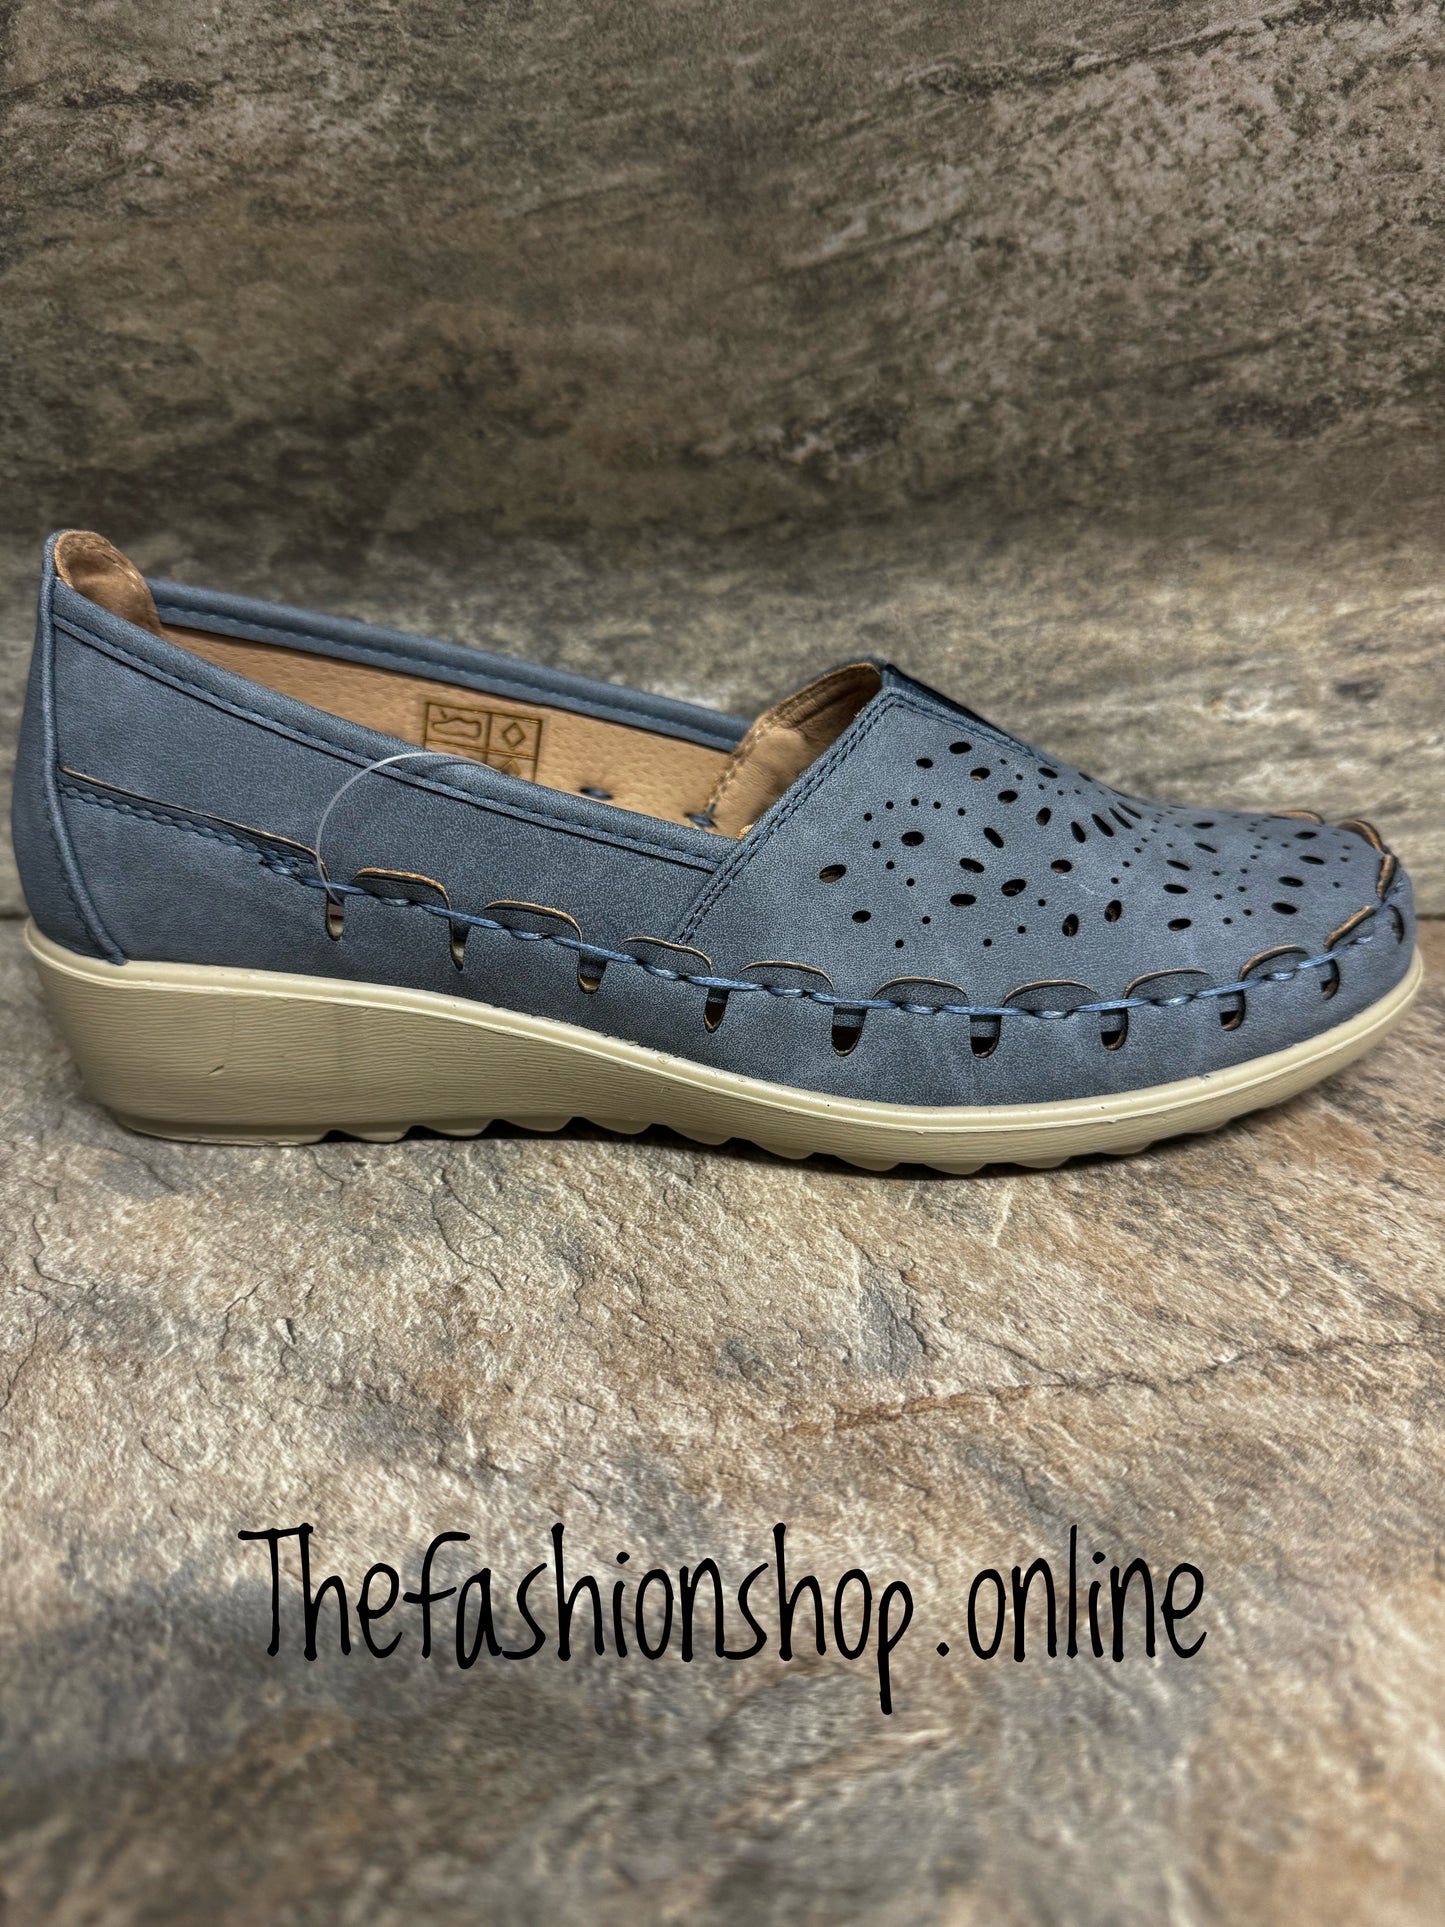 Cushion-walk Lucy blue wide fit summer shoe sizes 3-8